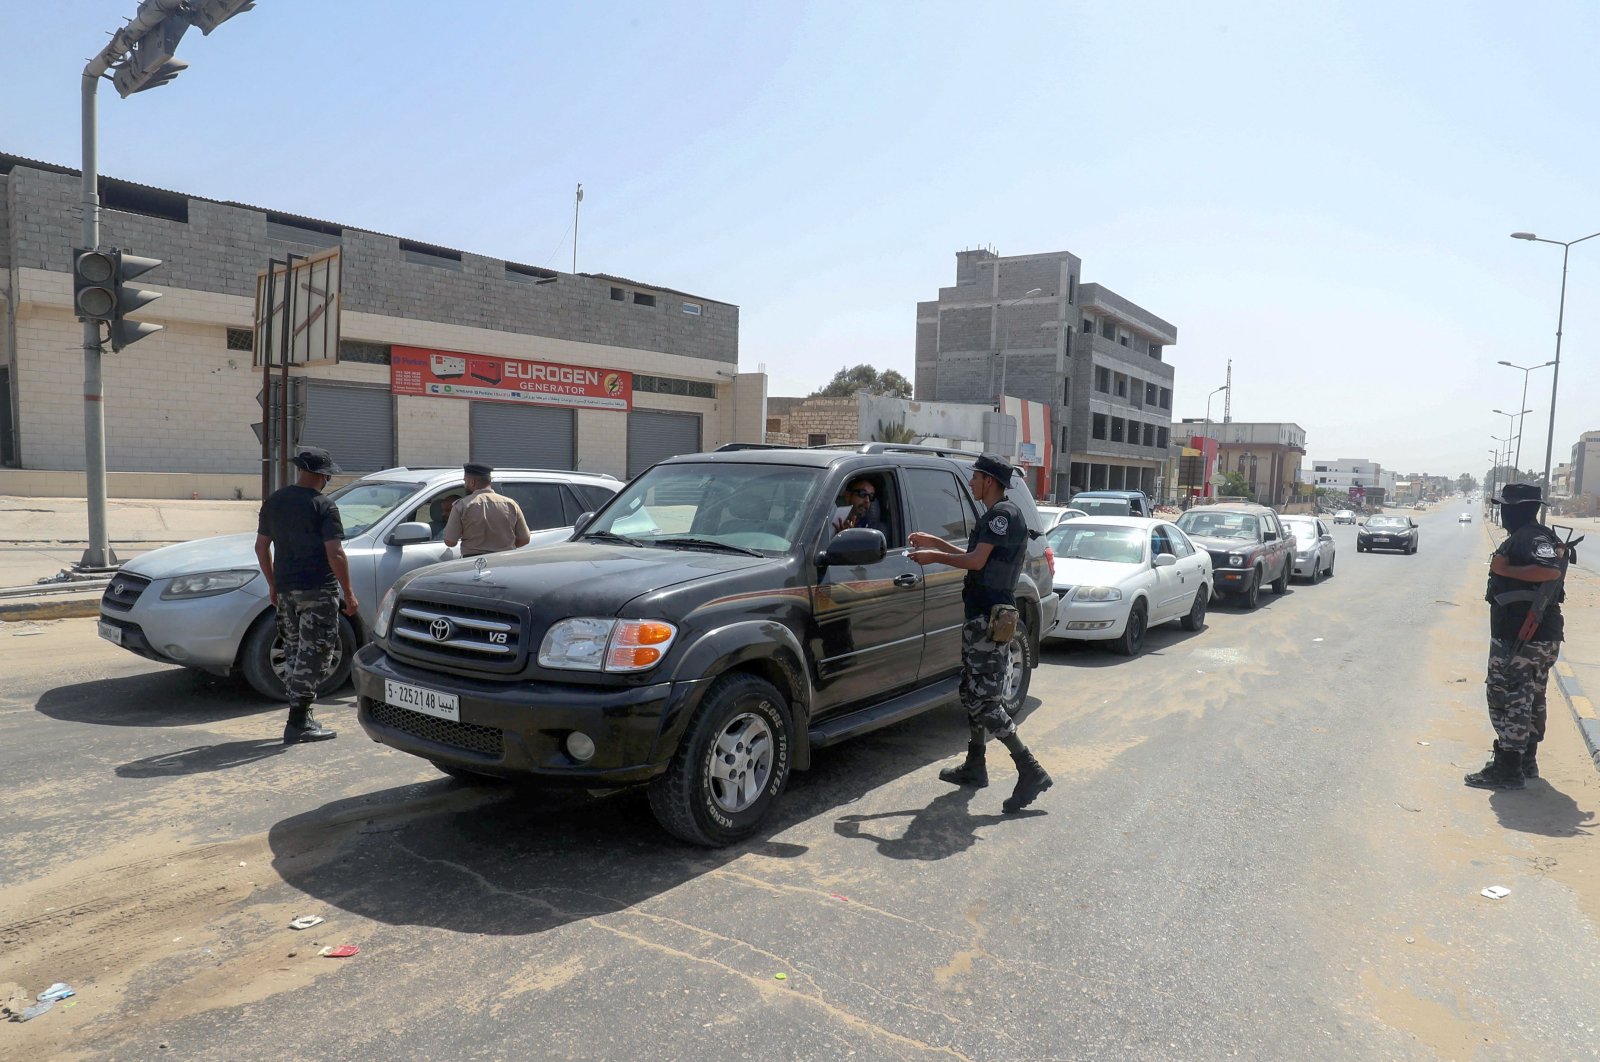 Libyan security officers run a checkpoint to verify the implementation of a total curfew the authorities announced a day earlier to mitigate the spread of the COVID-19 pandemic, in the capital Tripoli, Libya, Aug. 7, 2021. (AFP Photo)